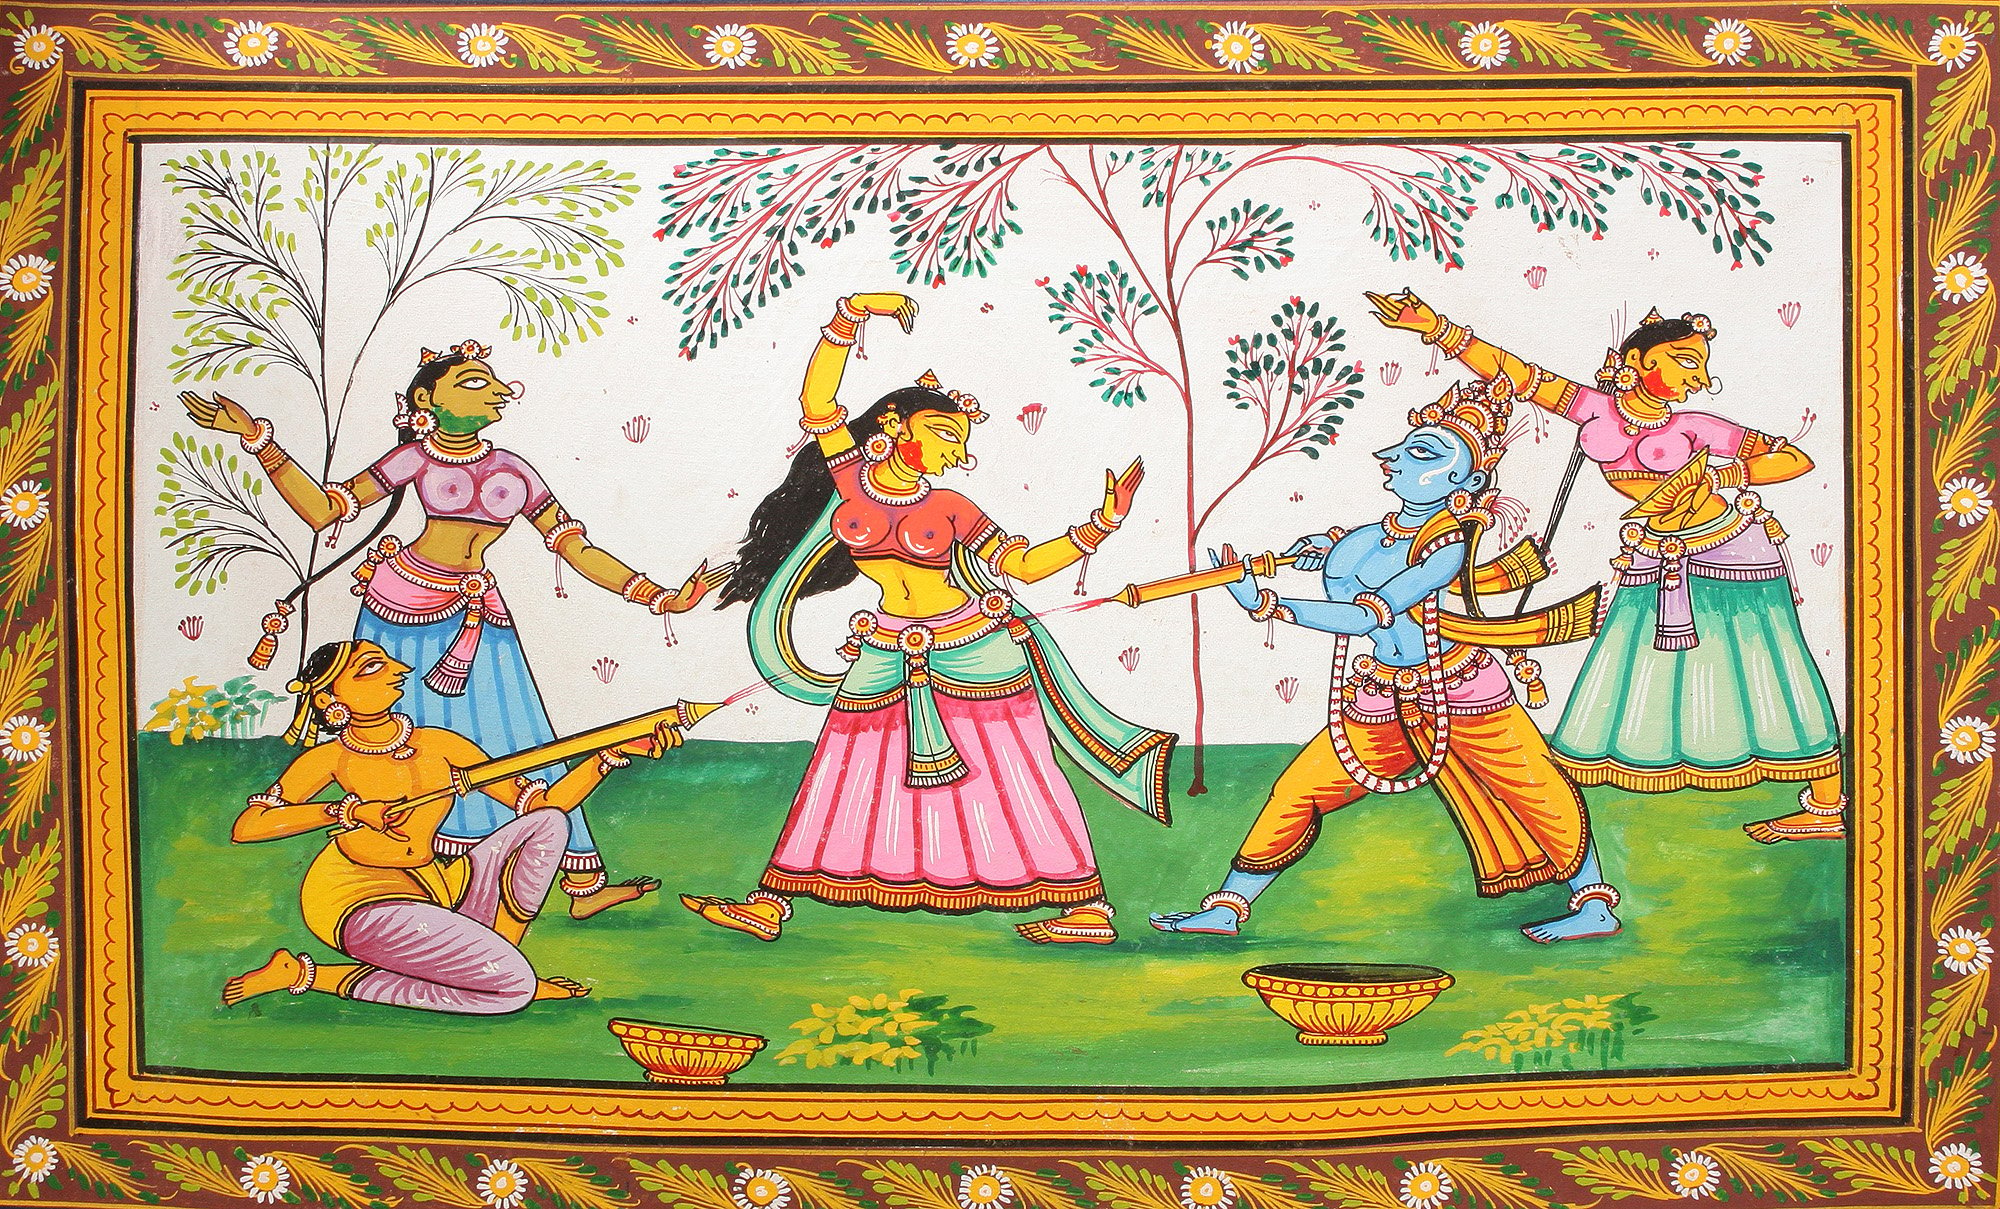 Beautiful Holi Greetings With Joyful Krishna And Radha Playing Colors  Design, Holi, Celebration, Transparent PNG Transparent Image and Clipart  for Free Download